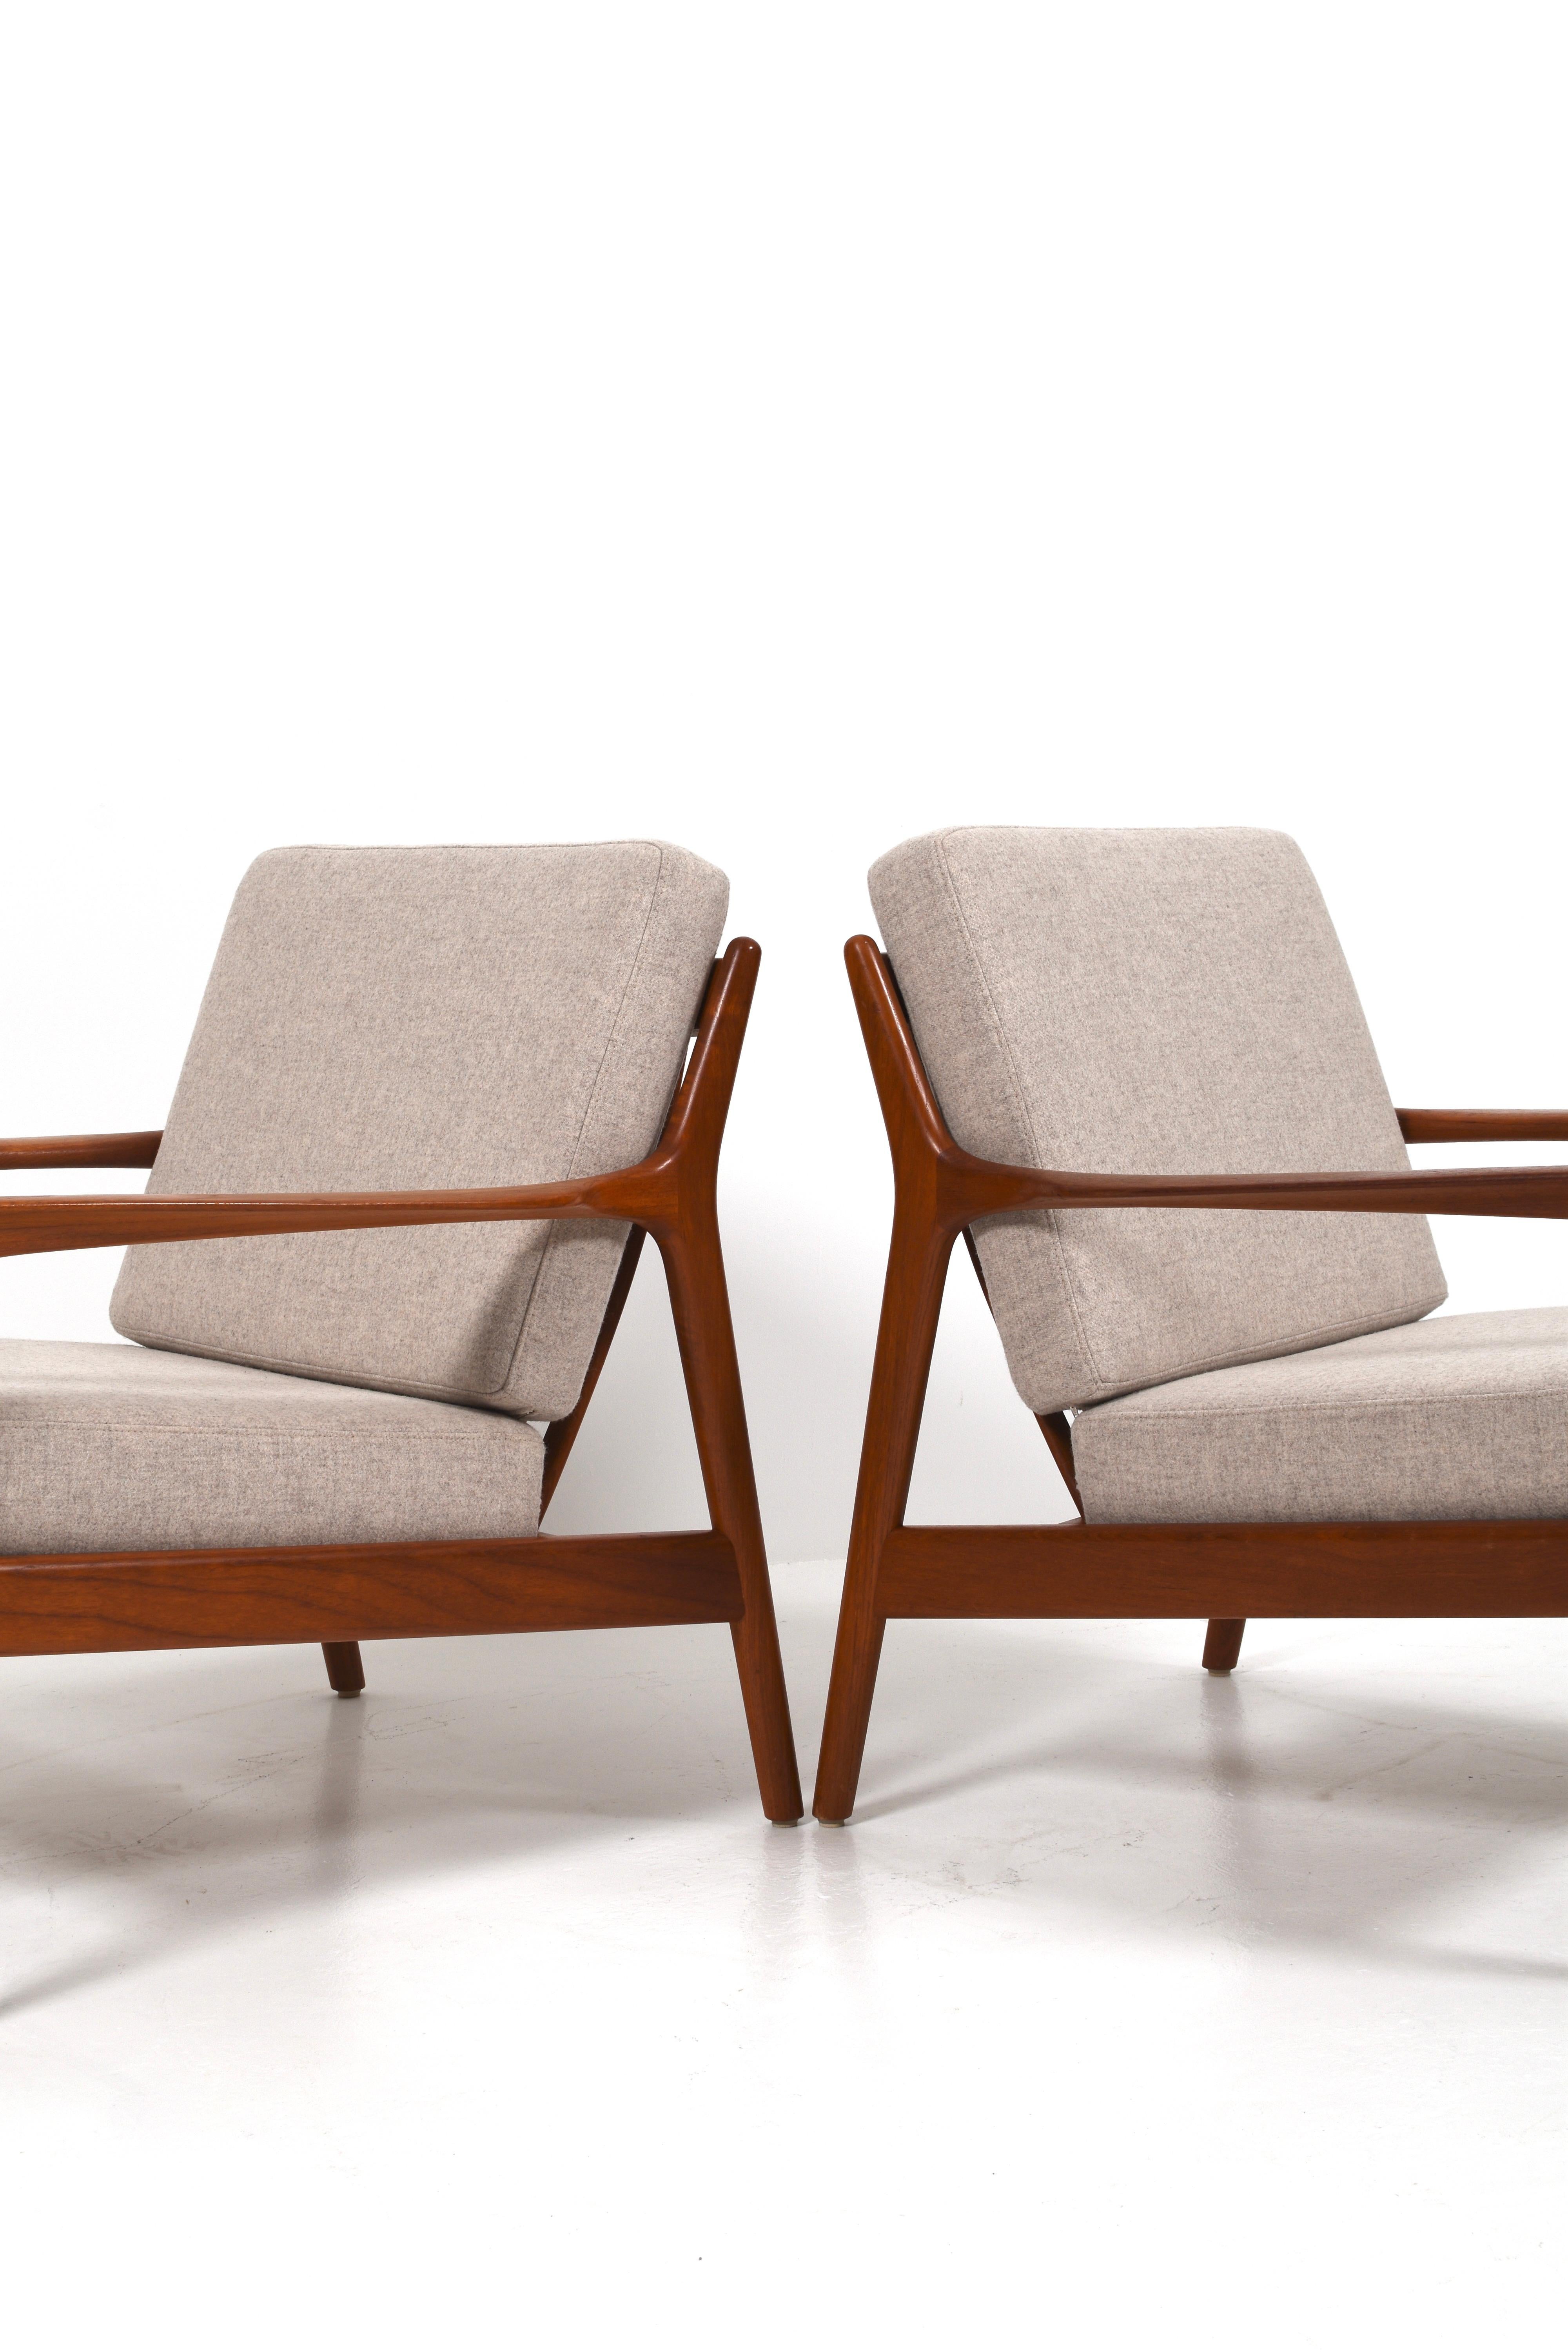 Pair of “USA 75” Teak Lounge Chairs by Folke Ohlsson for DUX, Sweden, 1960s In Good Condition For Sale In Göteborg, SE